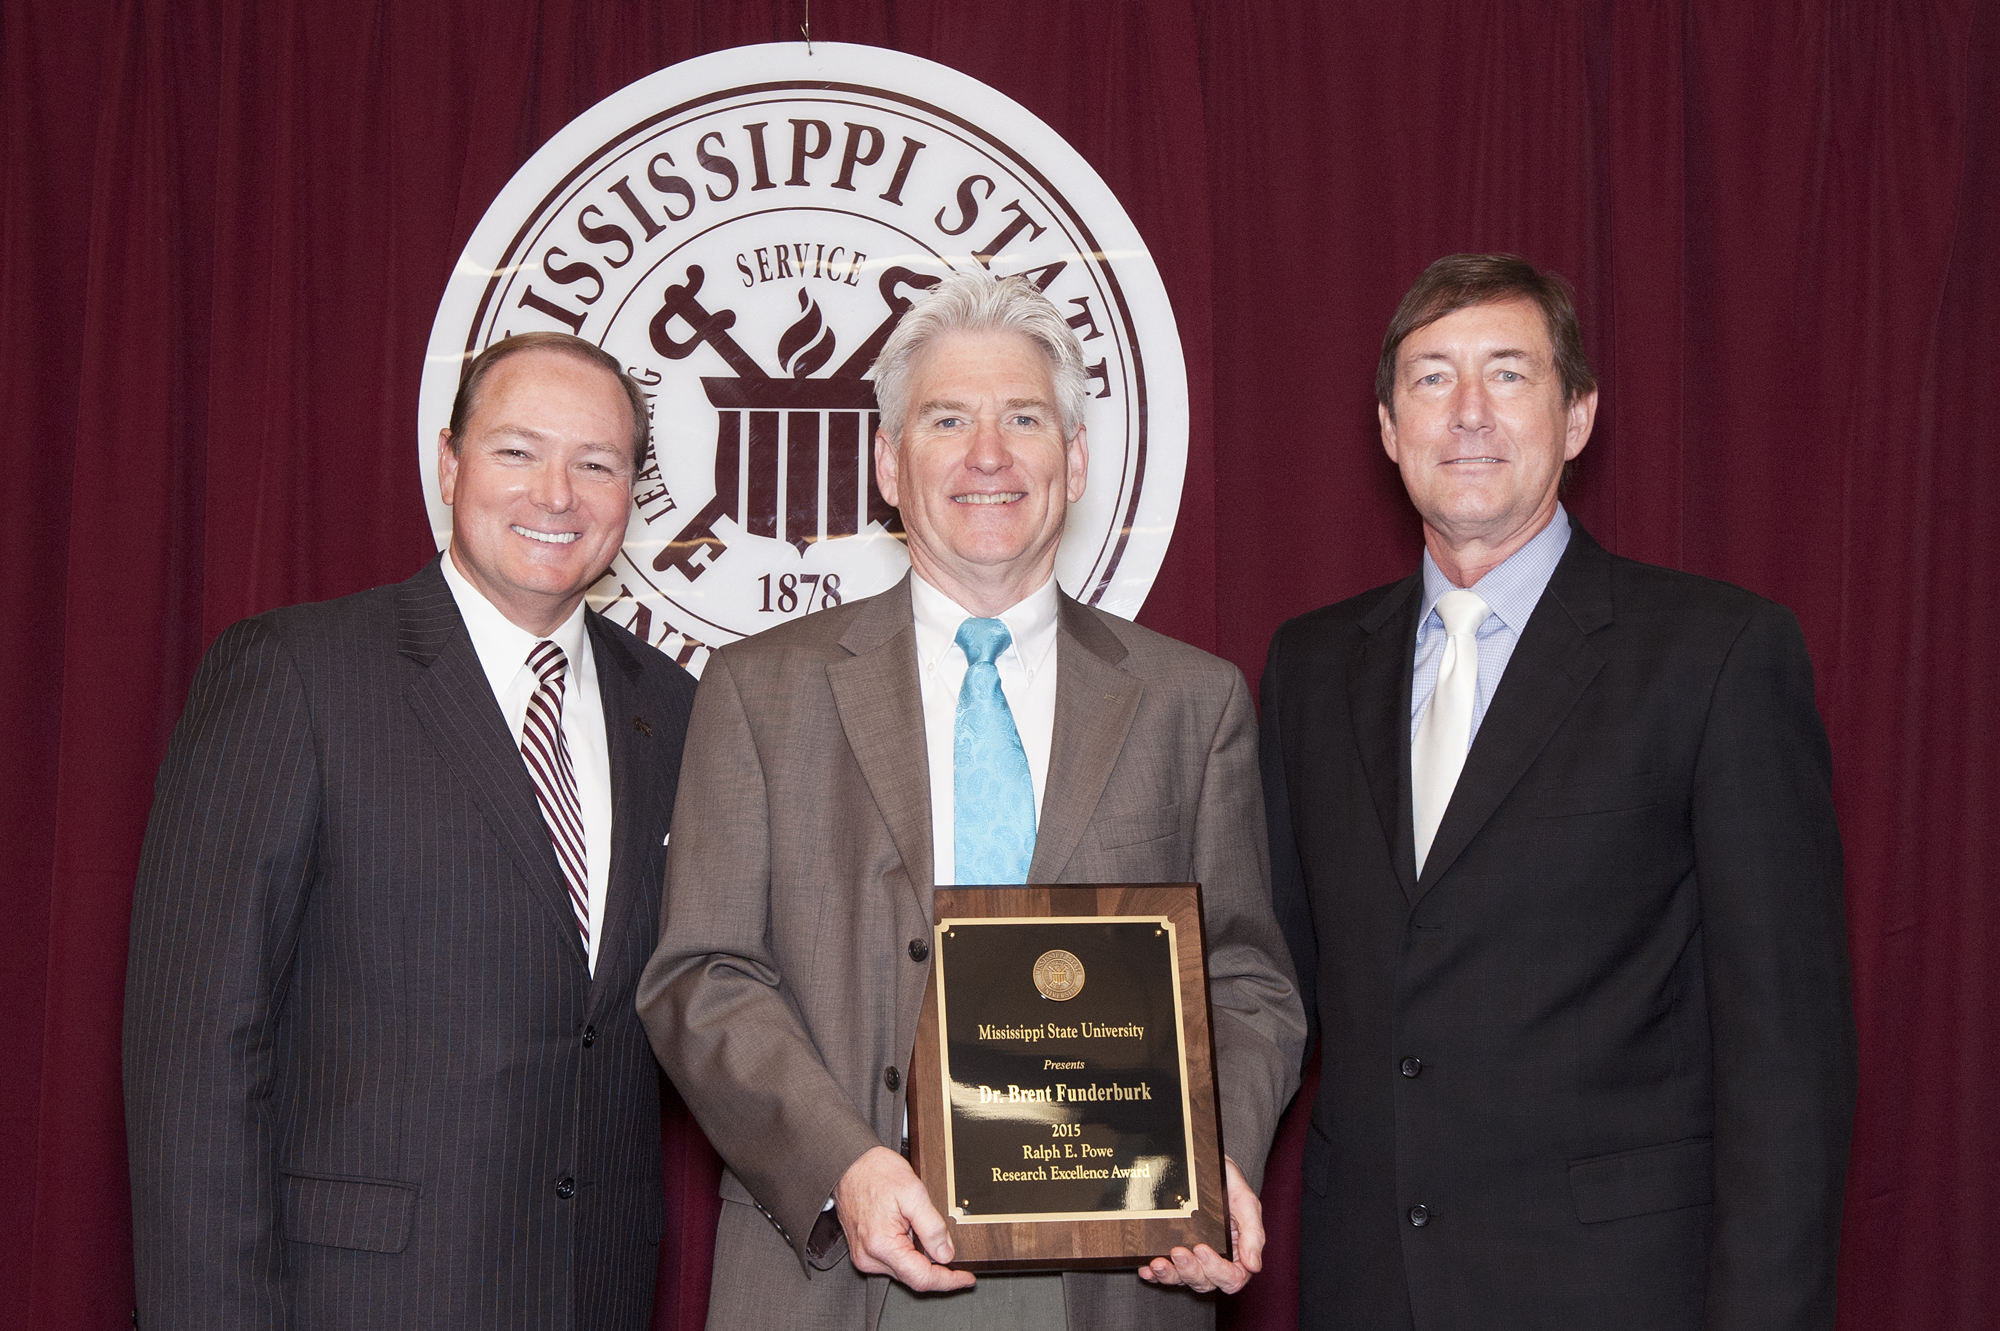 Mississippi State President Mark E. Keenum, left, and Greg Bohach, right, vice president for agriculture, forestry, and veterinary medicine, presented art professor Brent Funderburk with the 2015 Ralph E. Powe Research Excellence Award Thursday afternoon [April 30]. The Powe Award is the university's top research honor and is named for the late MSU alumnus and longtime research vice president.